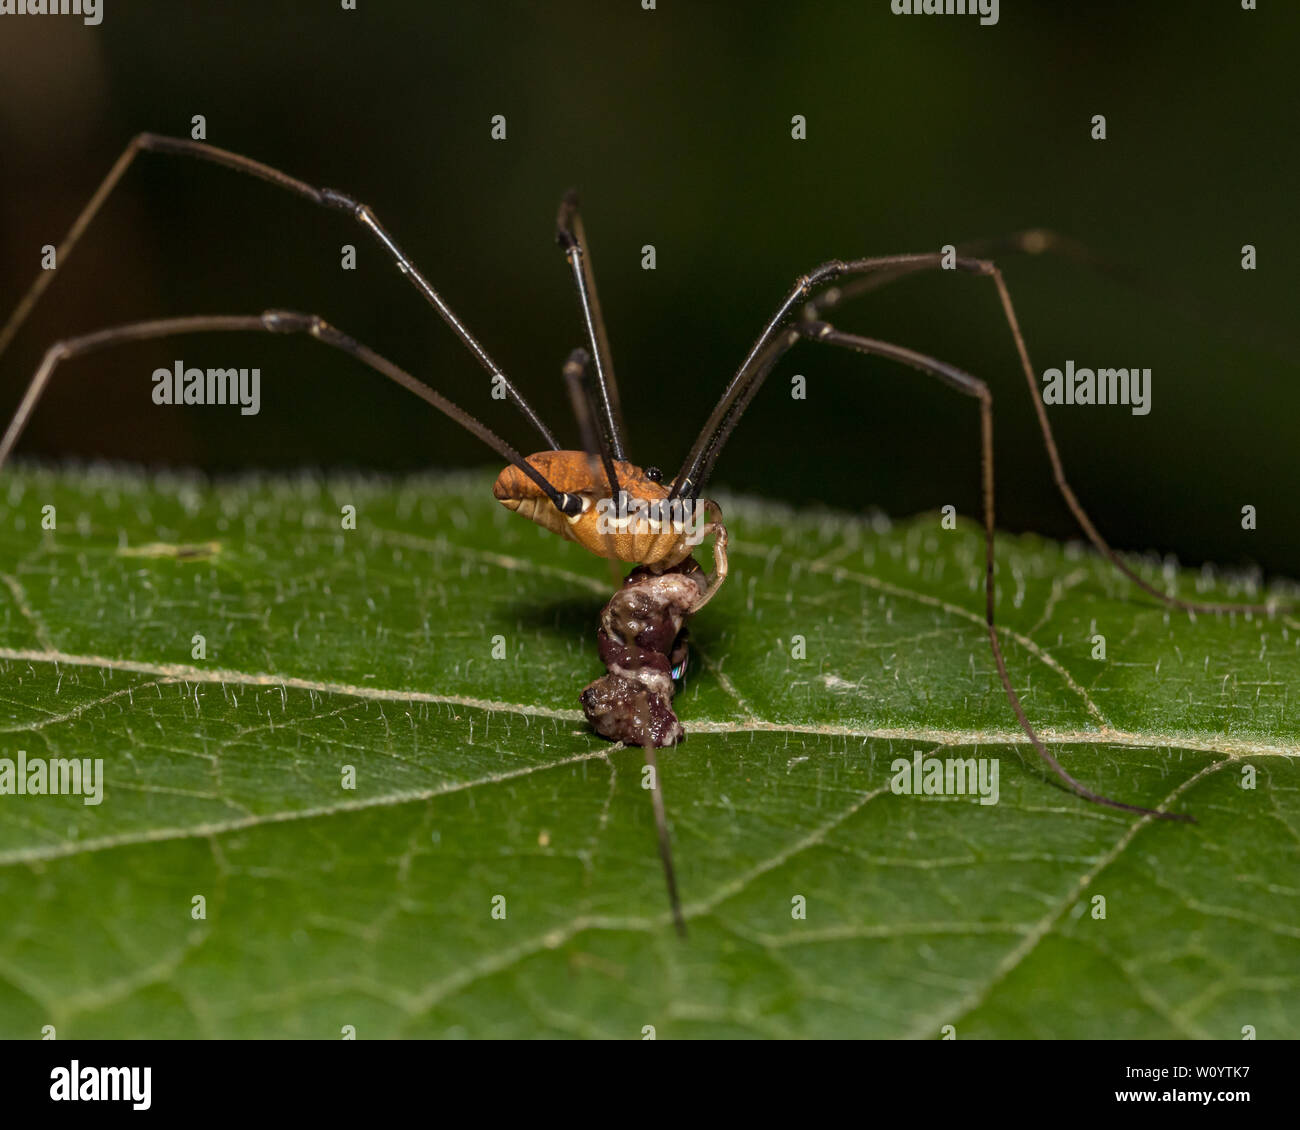 Harvestmen, commonly called a Daddy Long Legs spider, eating an insect while standing on a leaf Stock Photo